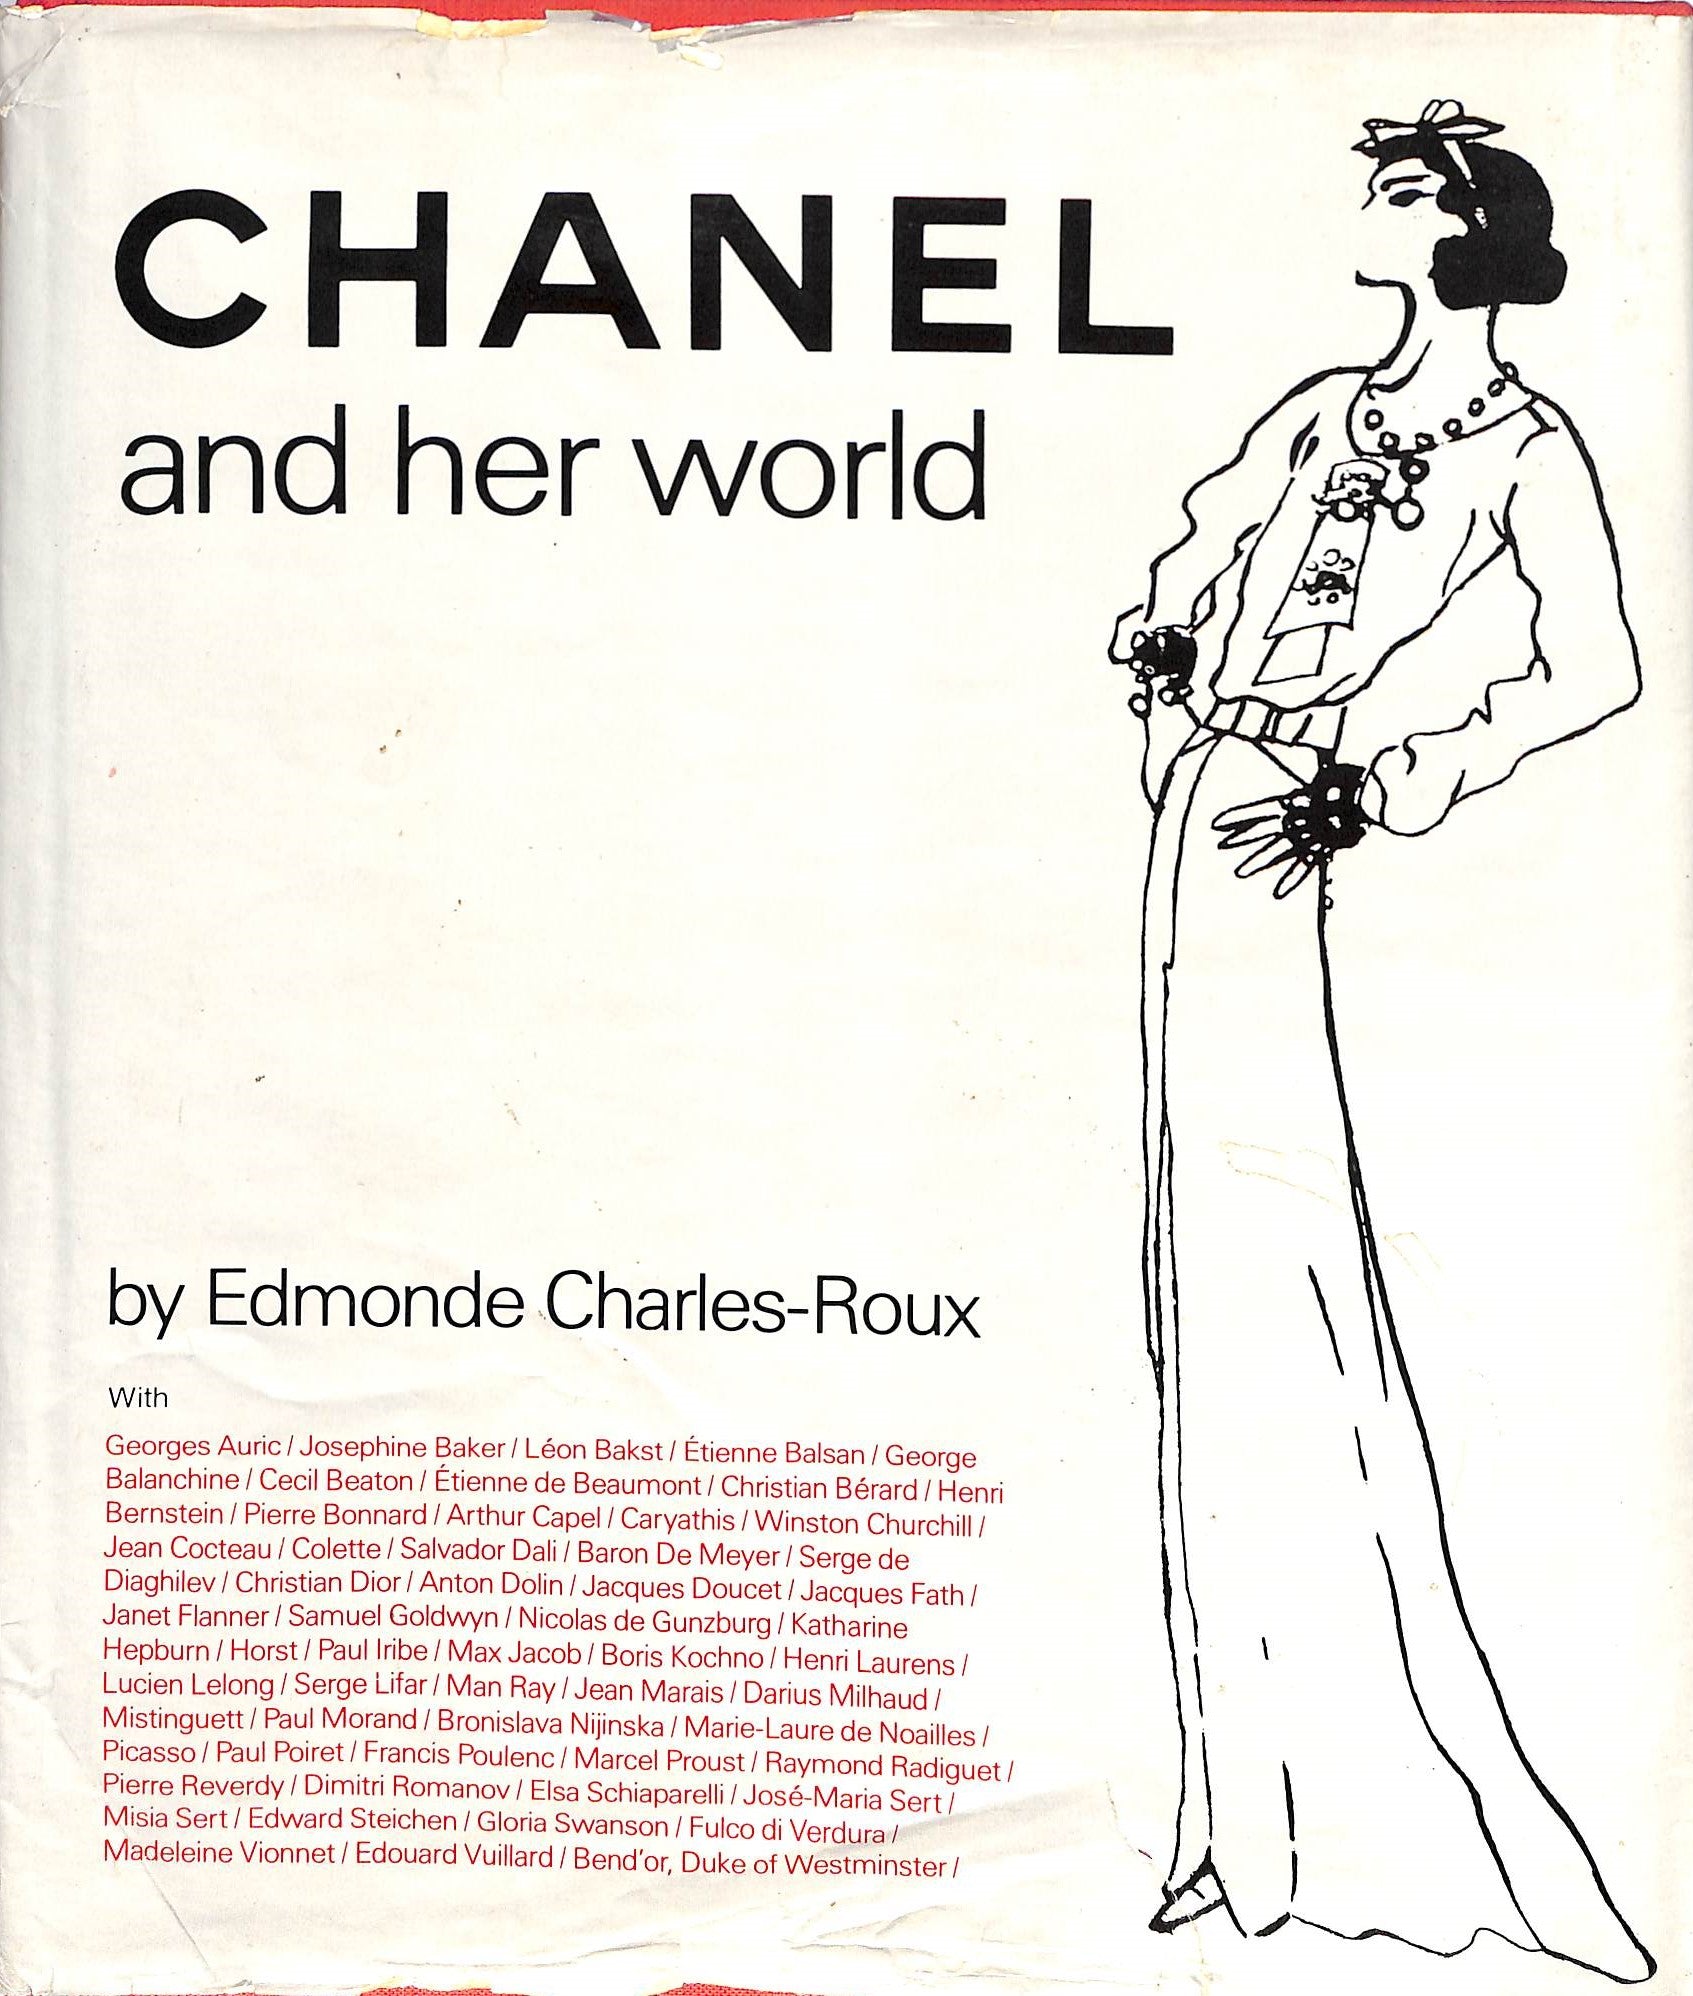 Chanel and Her World 1981 CHARLES-ROUX, Edmonde